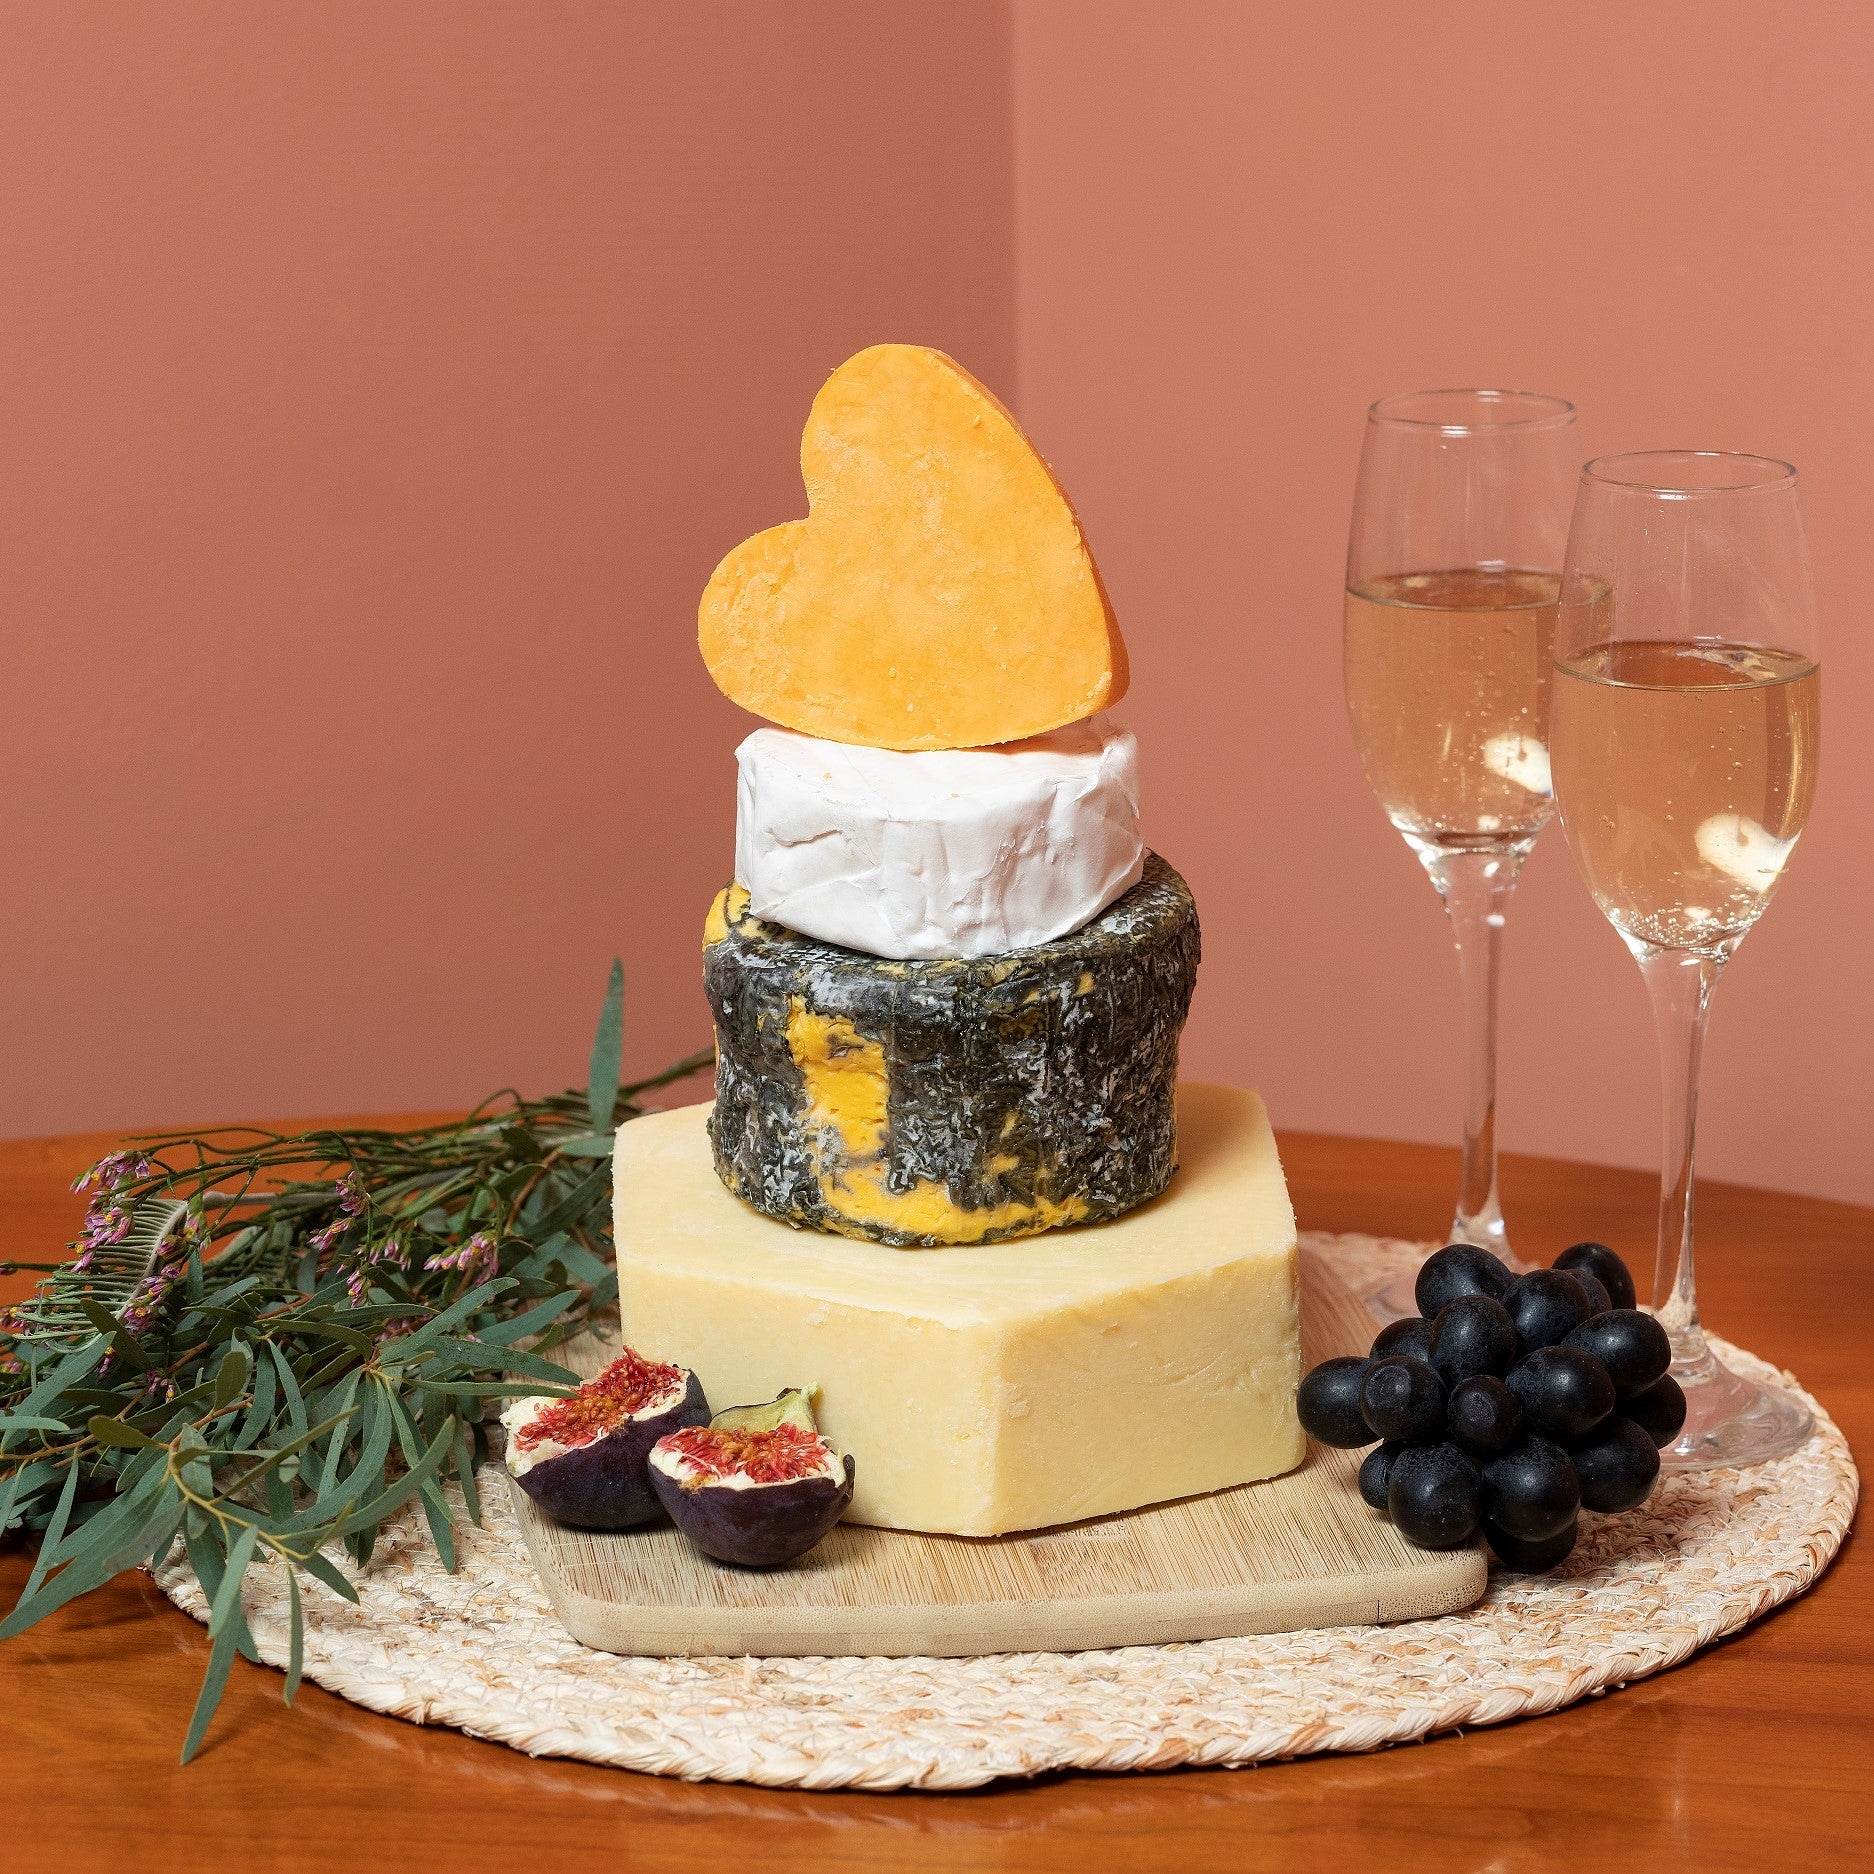 Small cheese wedding cake. Artisan cheese tower of hard, blue and soft cheese, topped with a red Lecister heart shaped cheese.